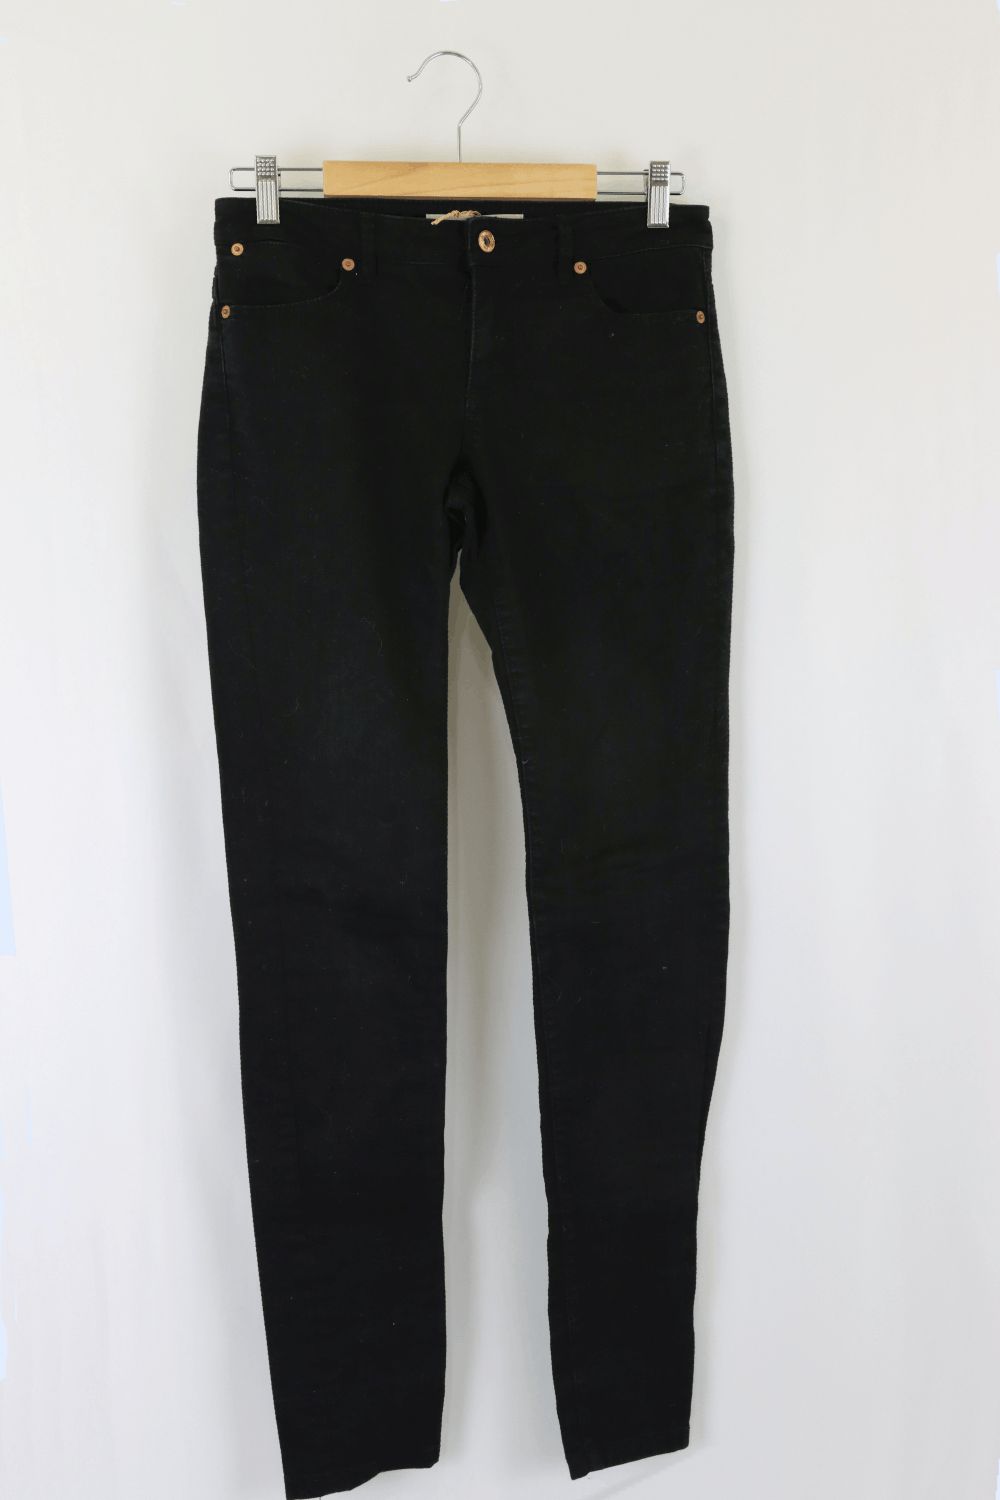 Country Road Black Jeans 8